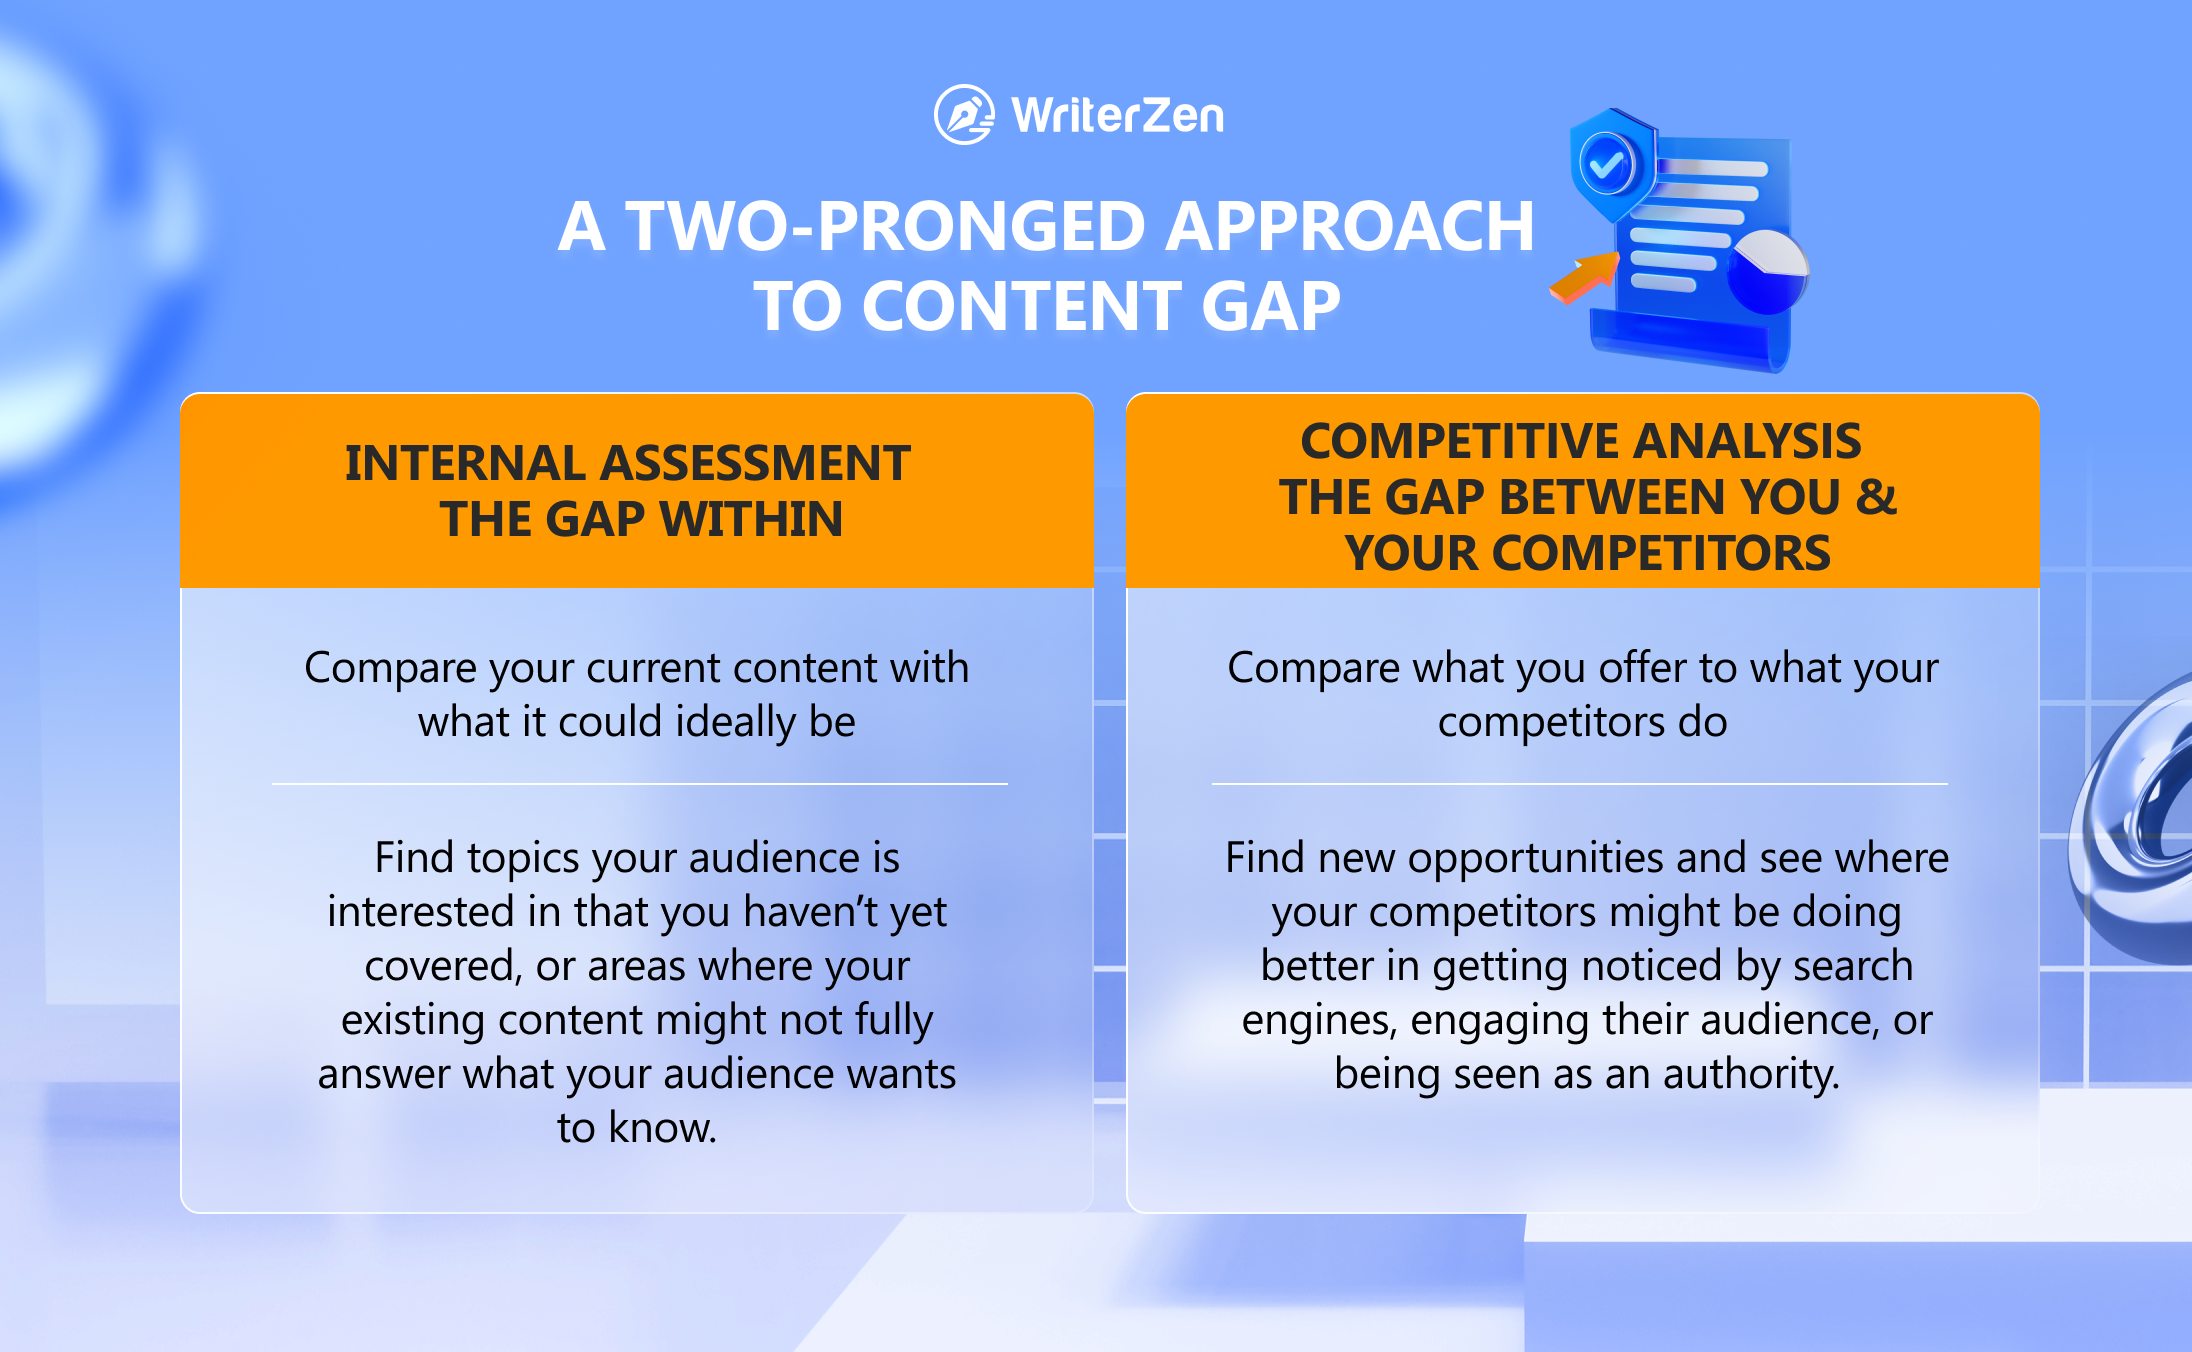 A Two-Pronged Approach to Content Gap